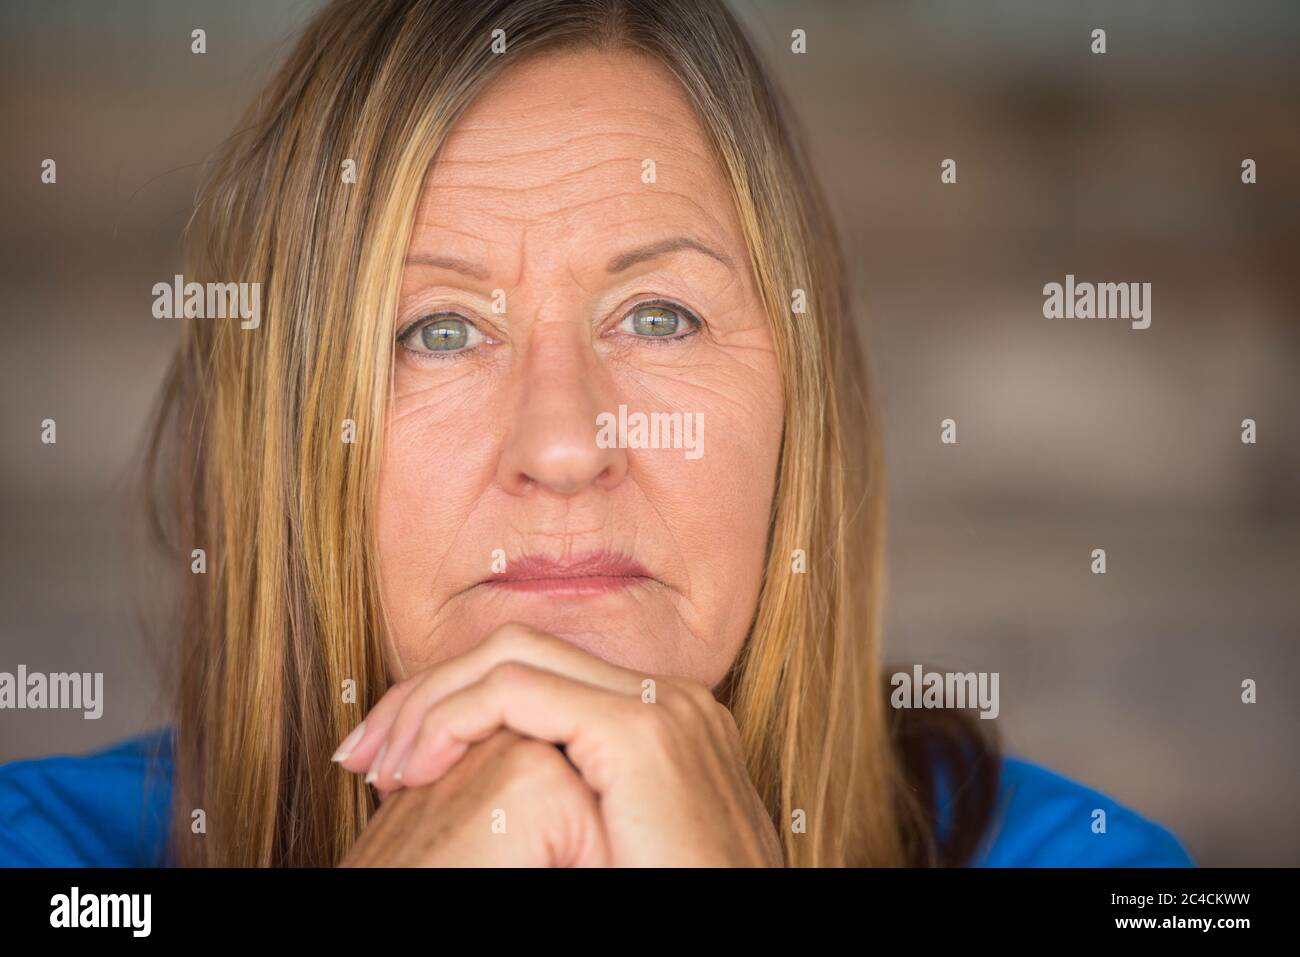 Portrait attractive mature woman with worried, thoughtful facial expression, chin on hands, blurred background. Stock Photo